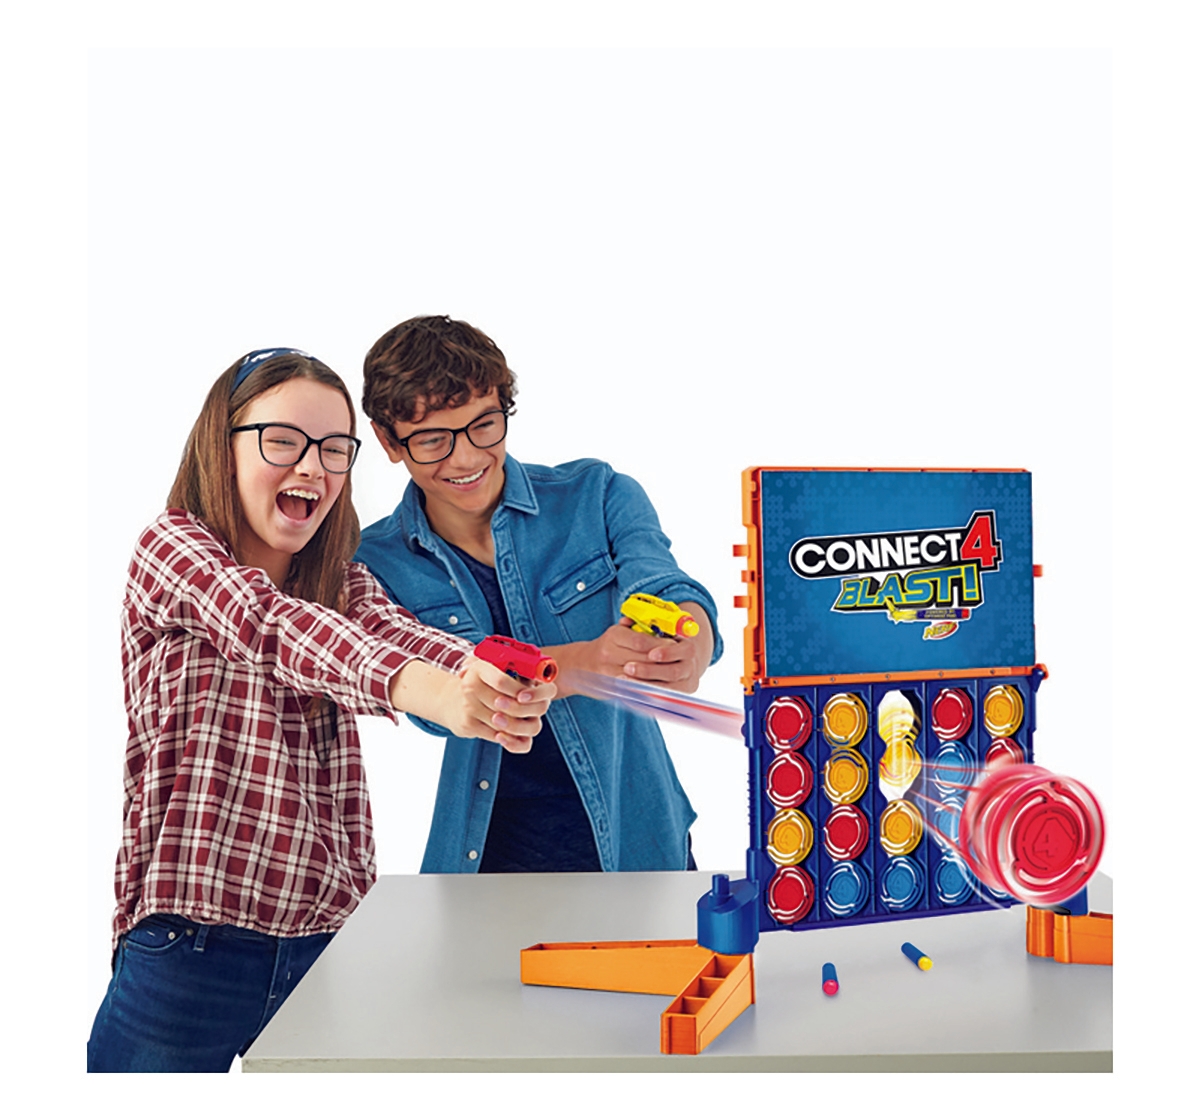 Hasbro Gaming | Hasbro Connect 4 Blast! Game With Nerf Blasters Games for Kids age 8Y+ 3